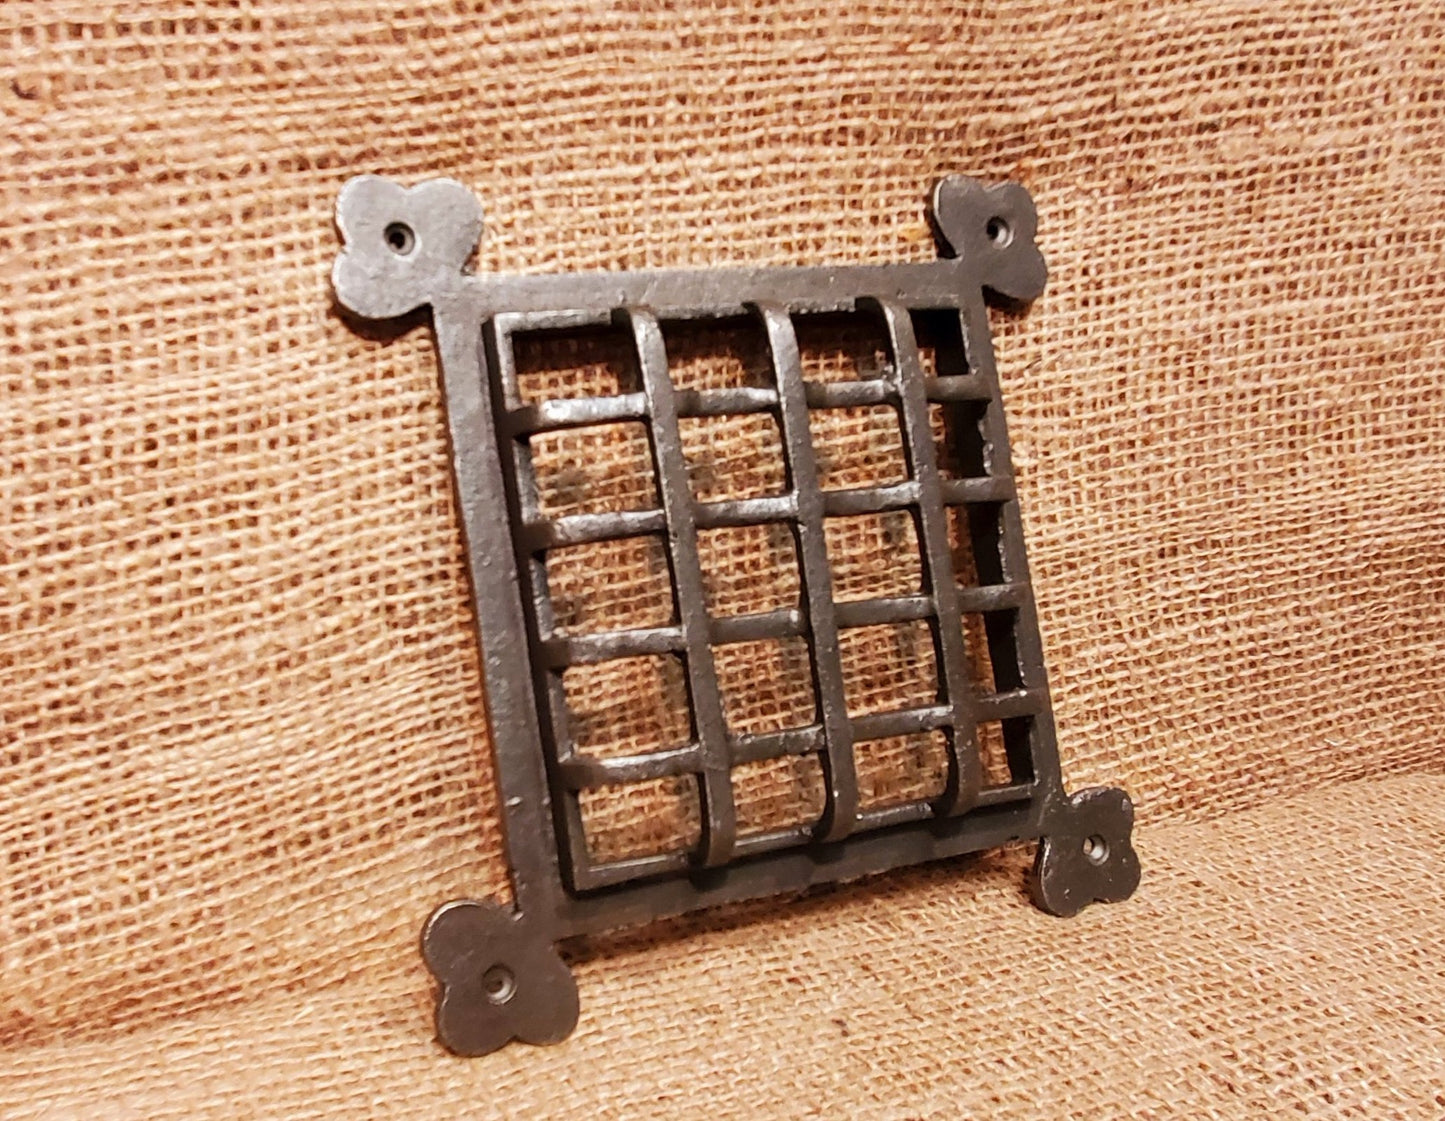 Door Grille / Viewer / Ceiling Vent Cover - 5" x 5"